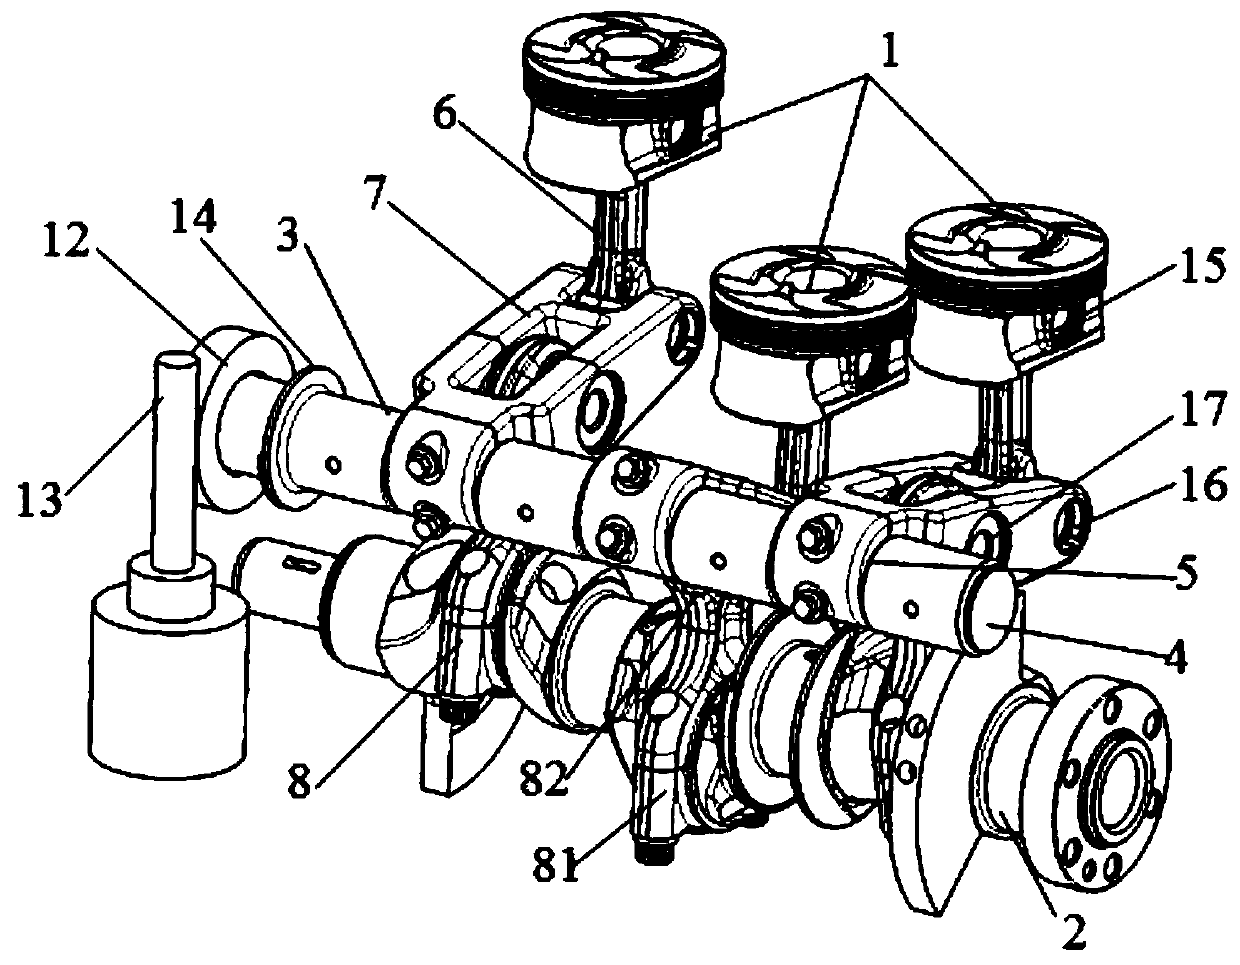 A variable compression ratio engine mechanism